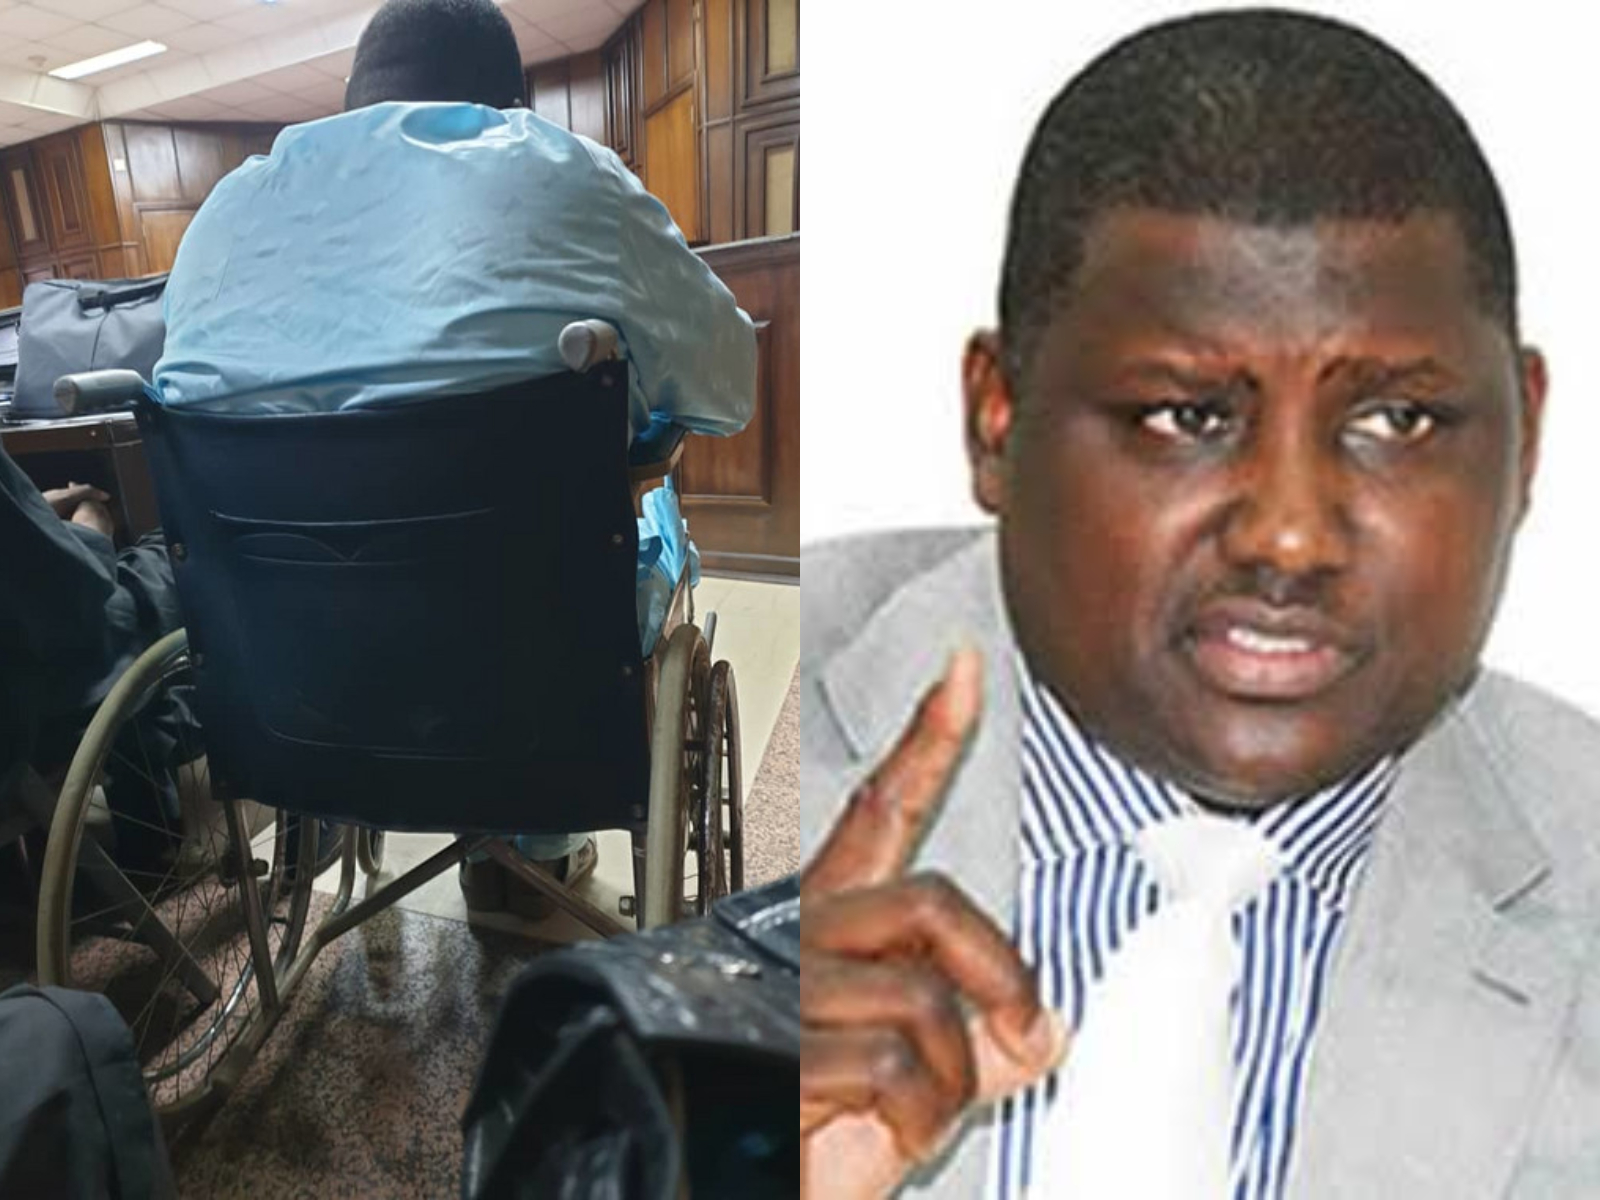 List of Politicians who have showed up to Trial in Wheelchair, Braces, others